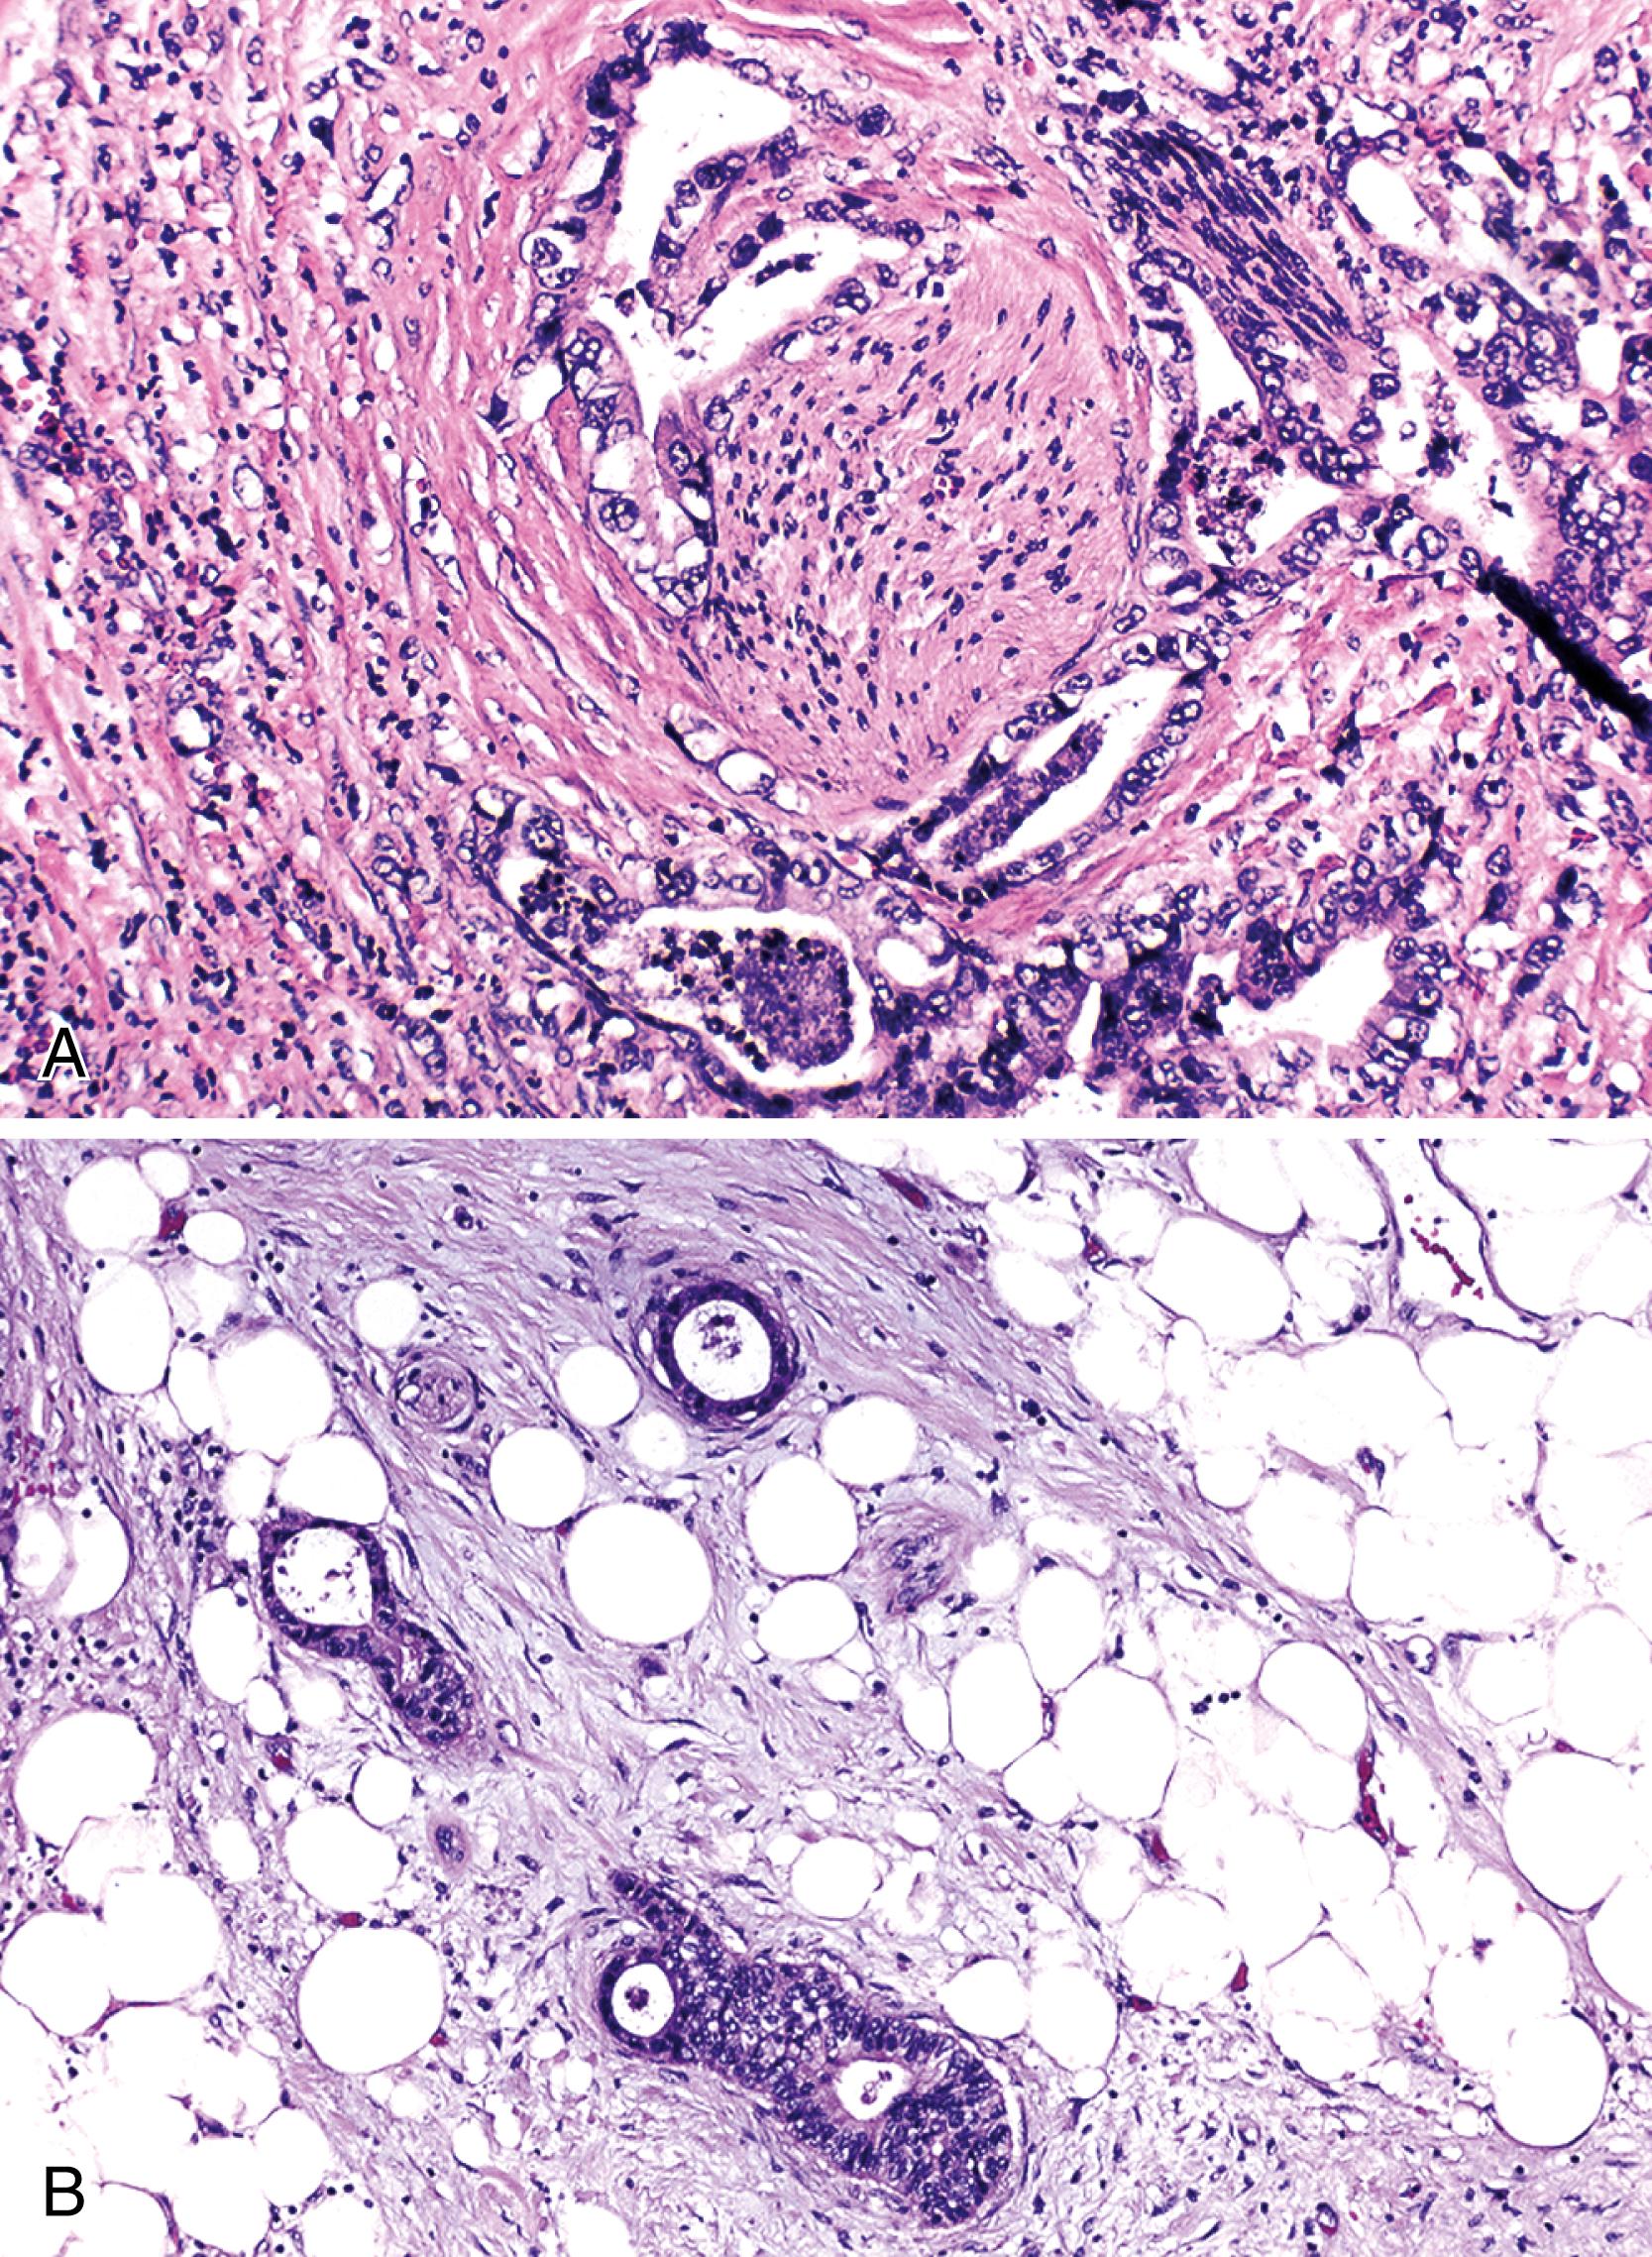 FIGURE 41.8, Findings diagnostic of ductal adenocarcinoma.